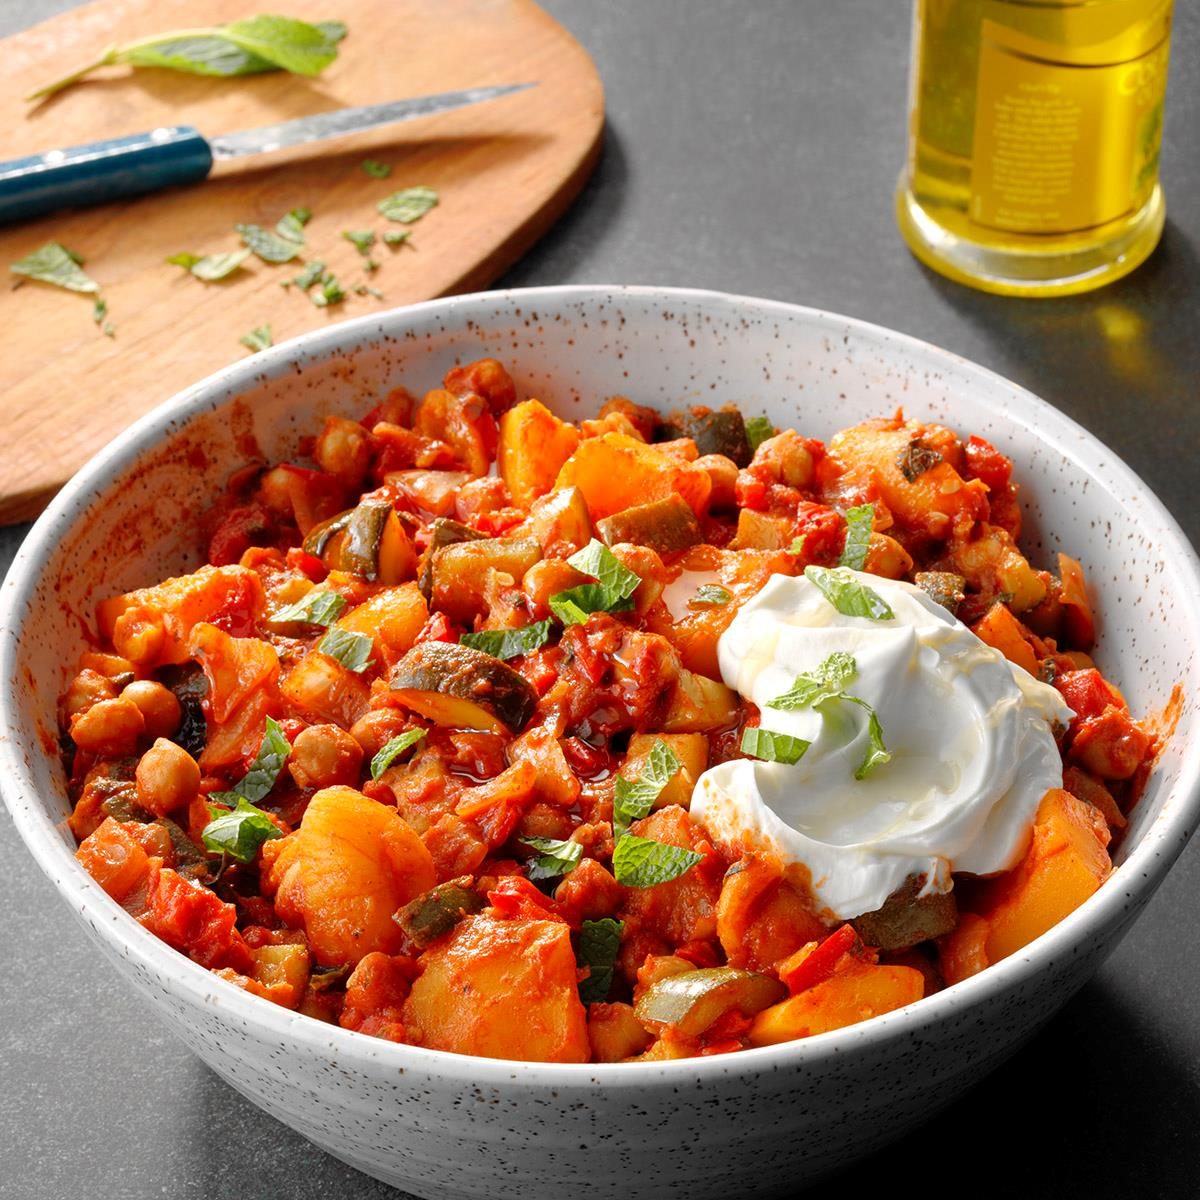 favourite slow cooker recipes - Slow cooker chickpea tagine recipe